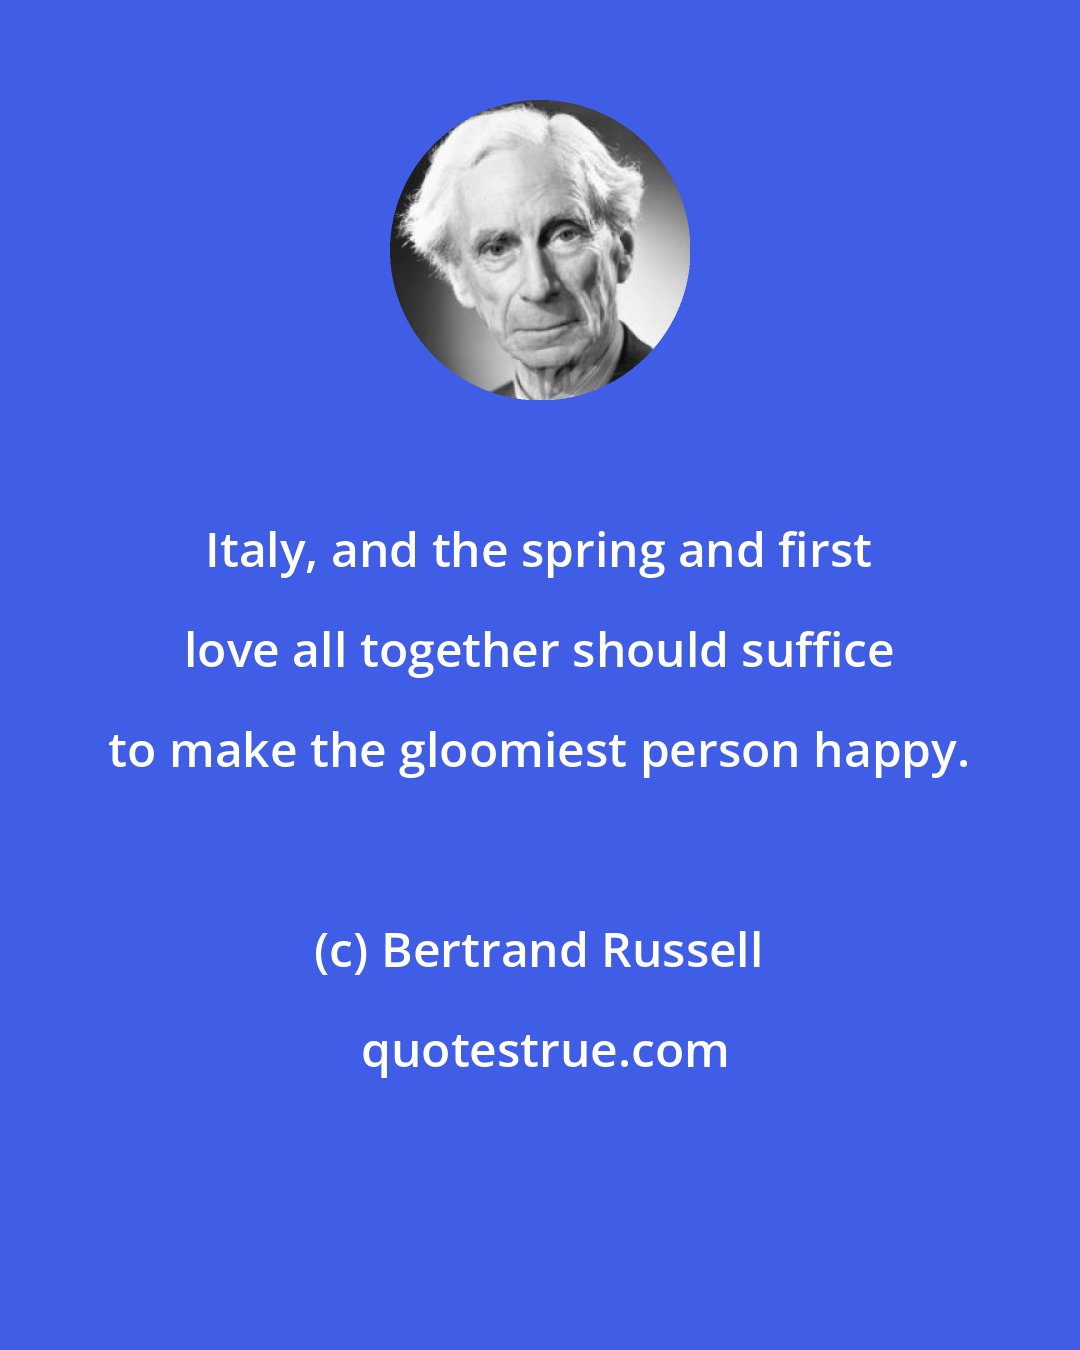 Bertrand Russell: Italy, and the spring and first love all together should suffice to make the gloomiest person happy.